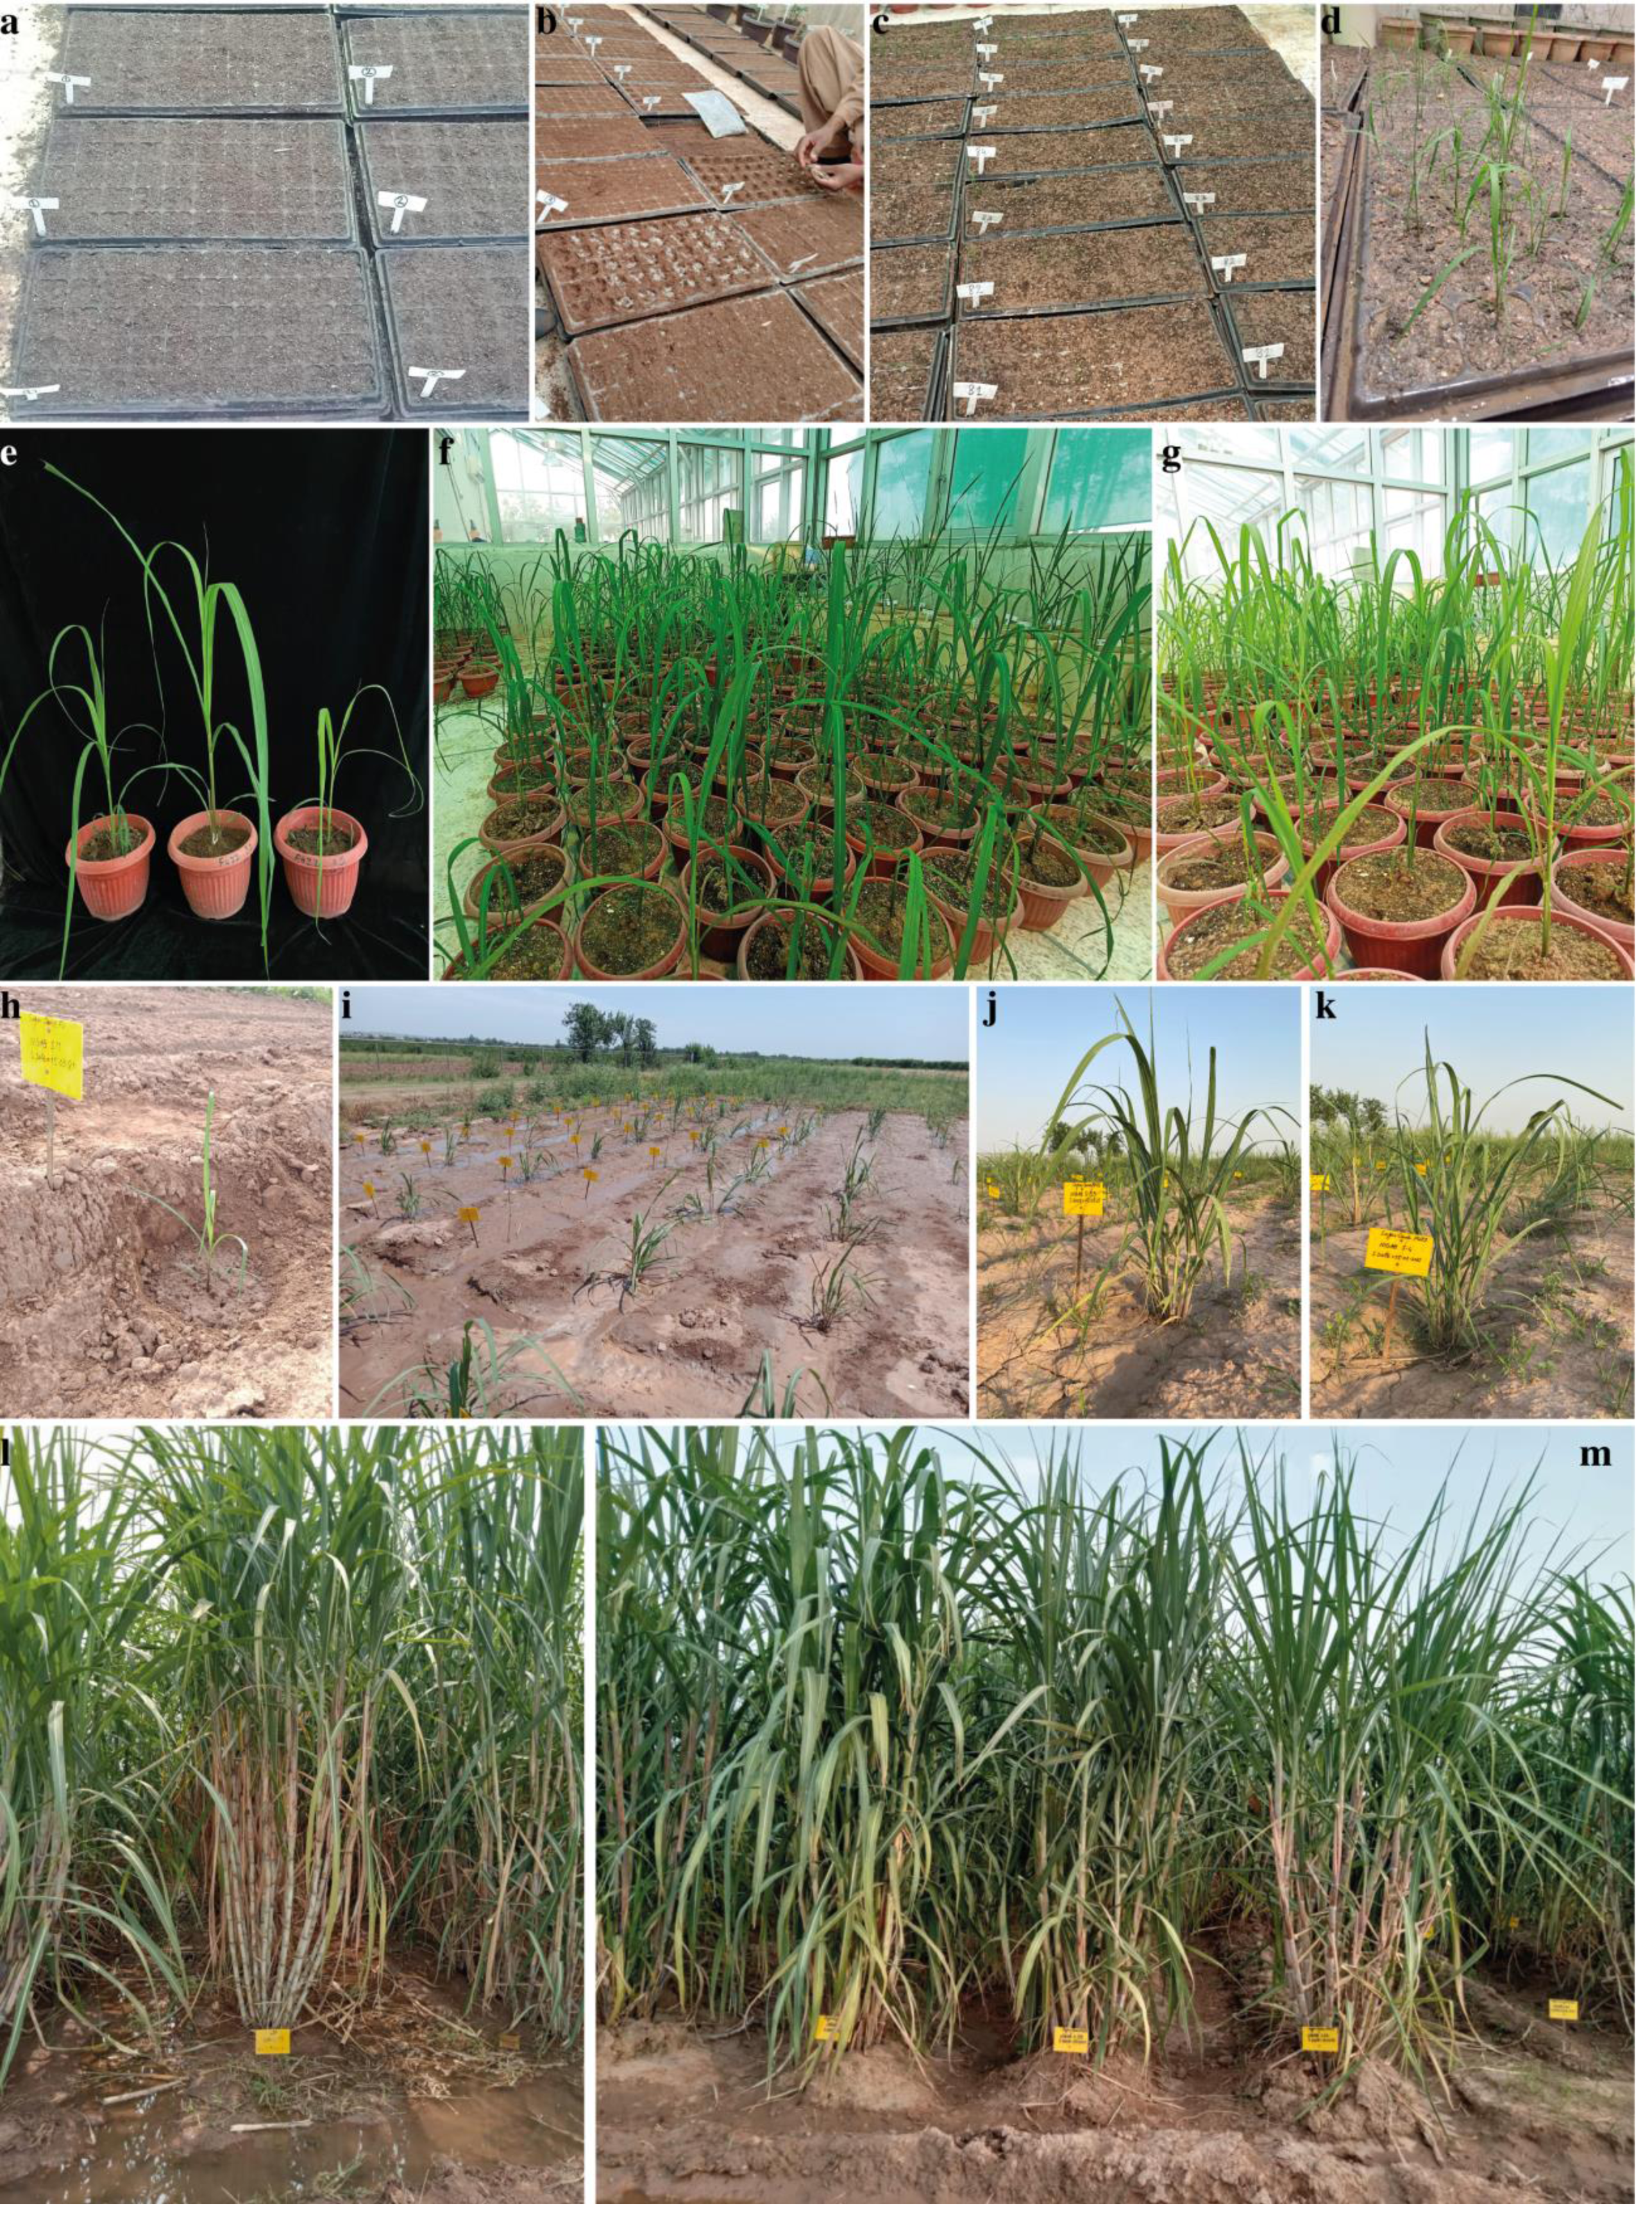 Pearson correlation coefficients for biomass traits in sugarcane